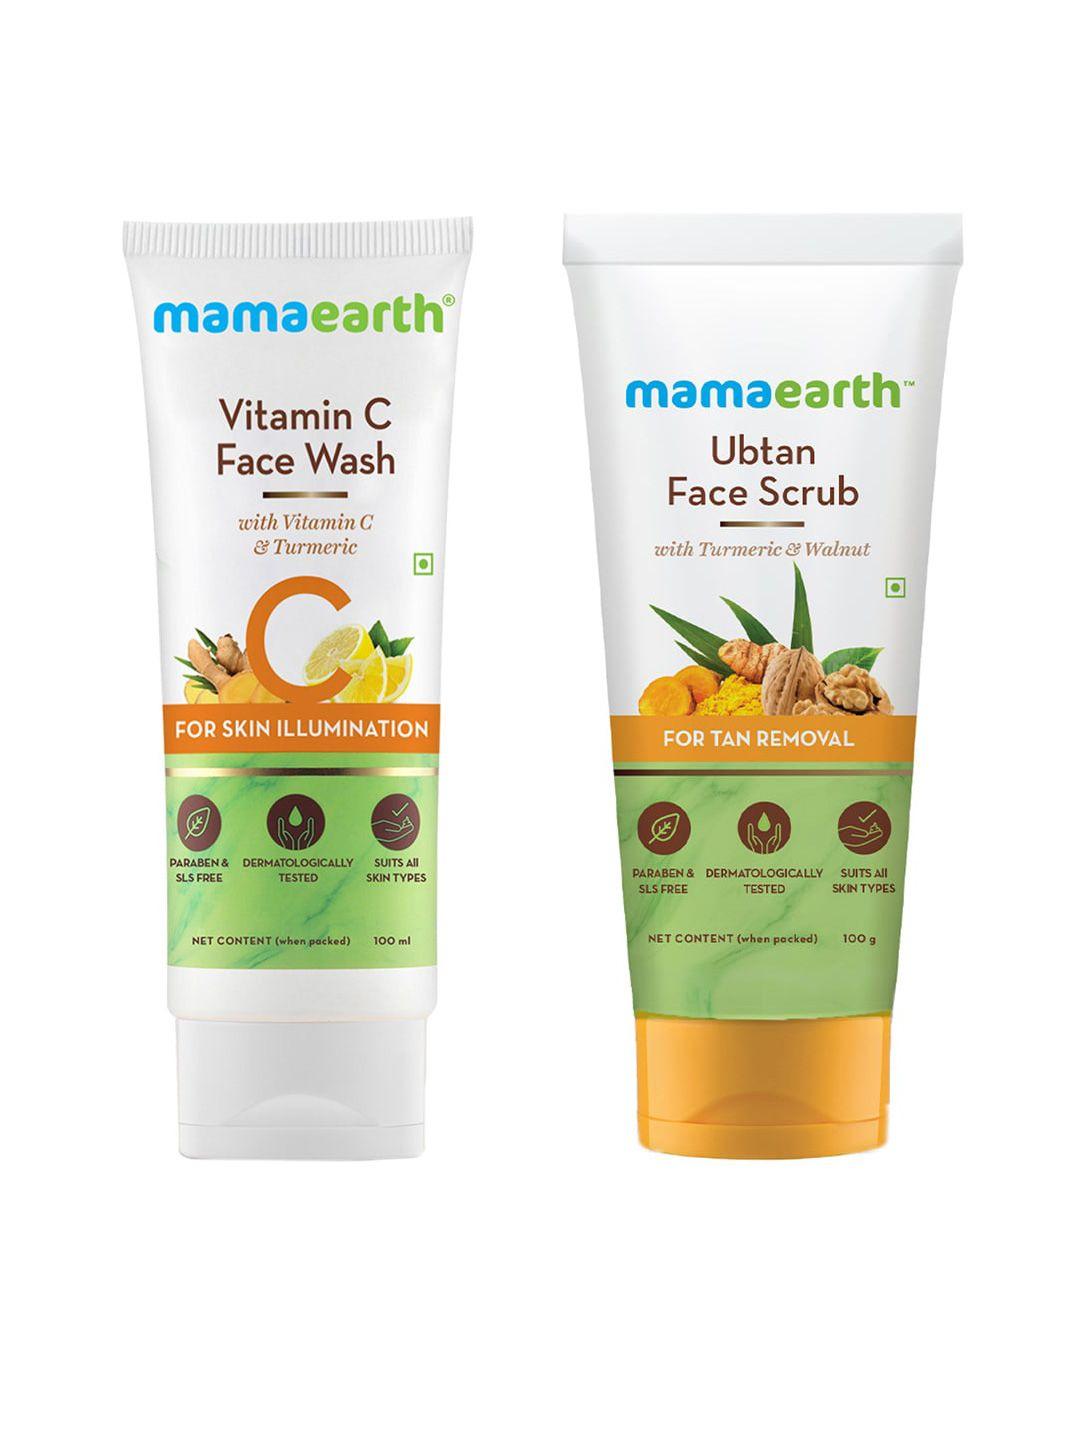 mamaearth unisex set of sustainable vitamin c face wash & tan removal scrub